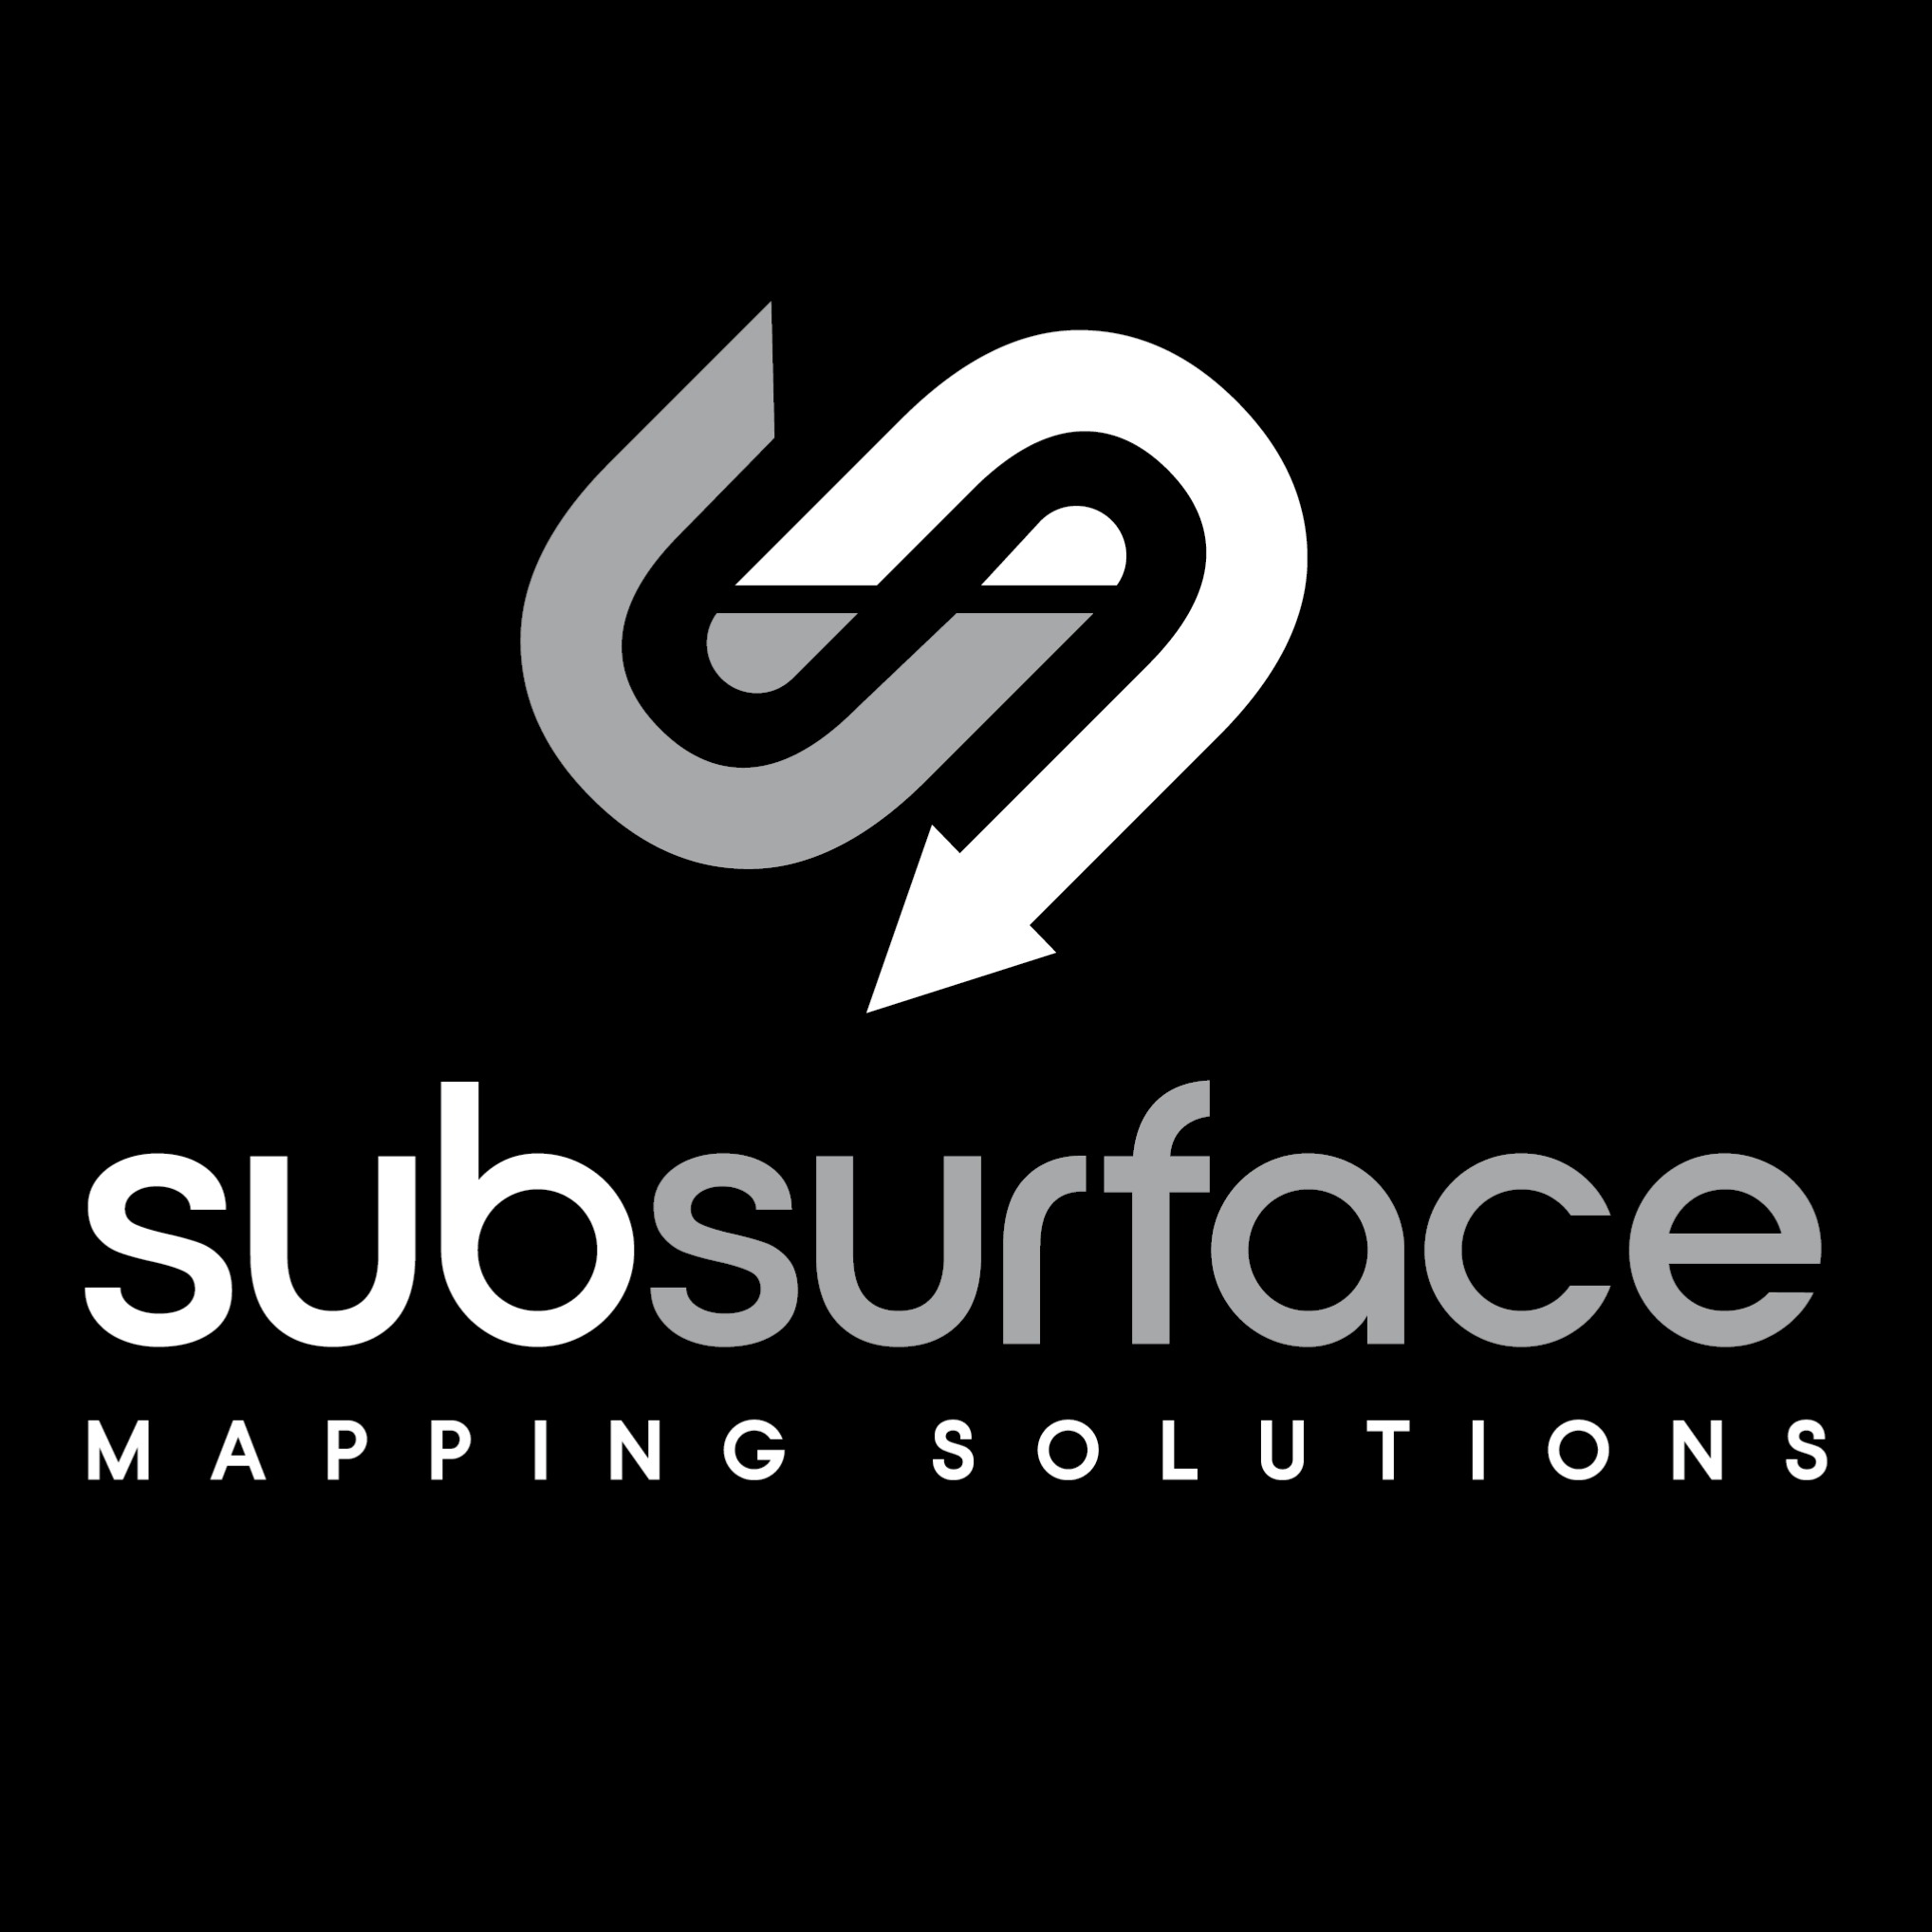 Subsurface Mapping Solutions Pty Ltd - Arundel, QLD 4214 - 0408 839 723 | ShowMeLocal.com